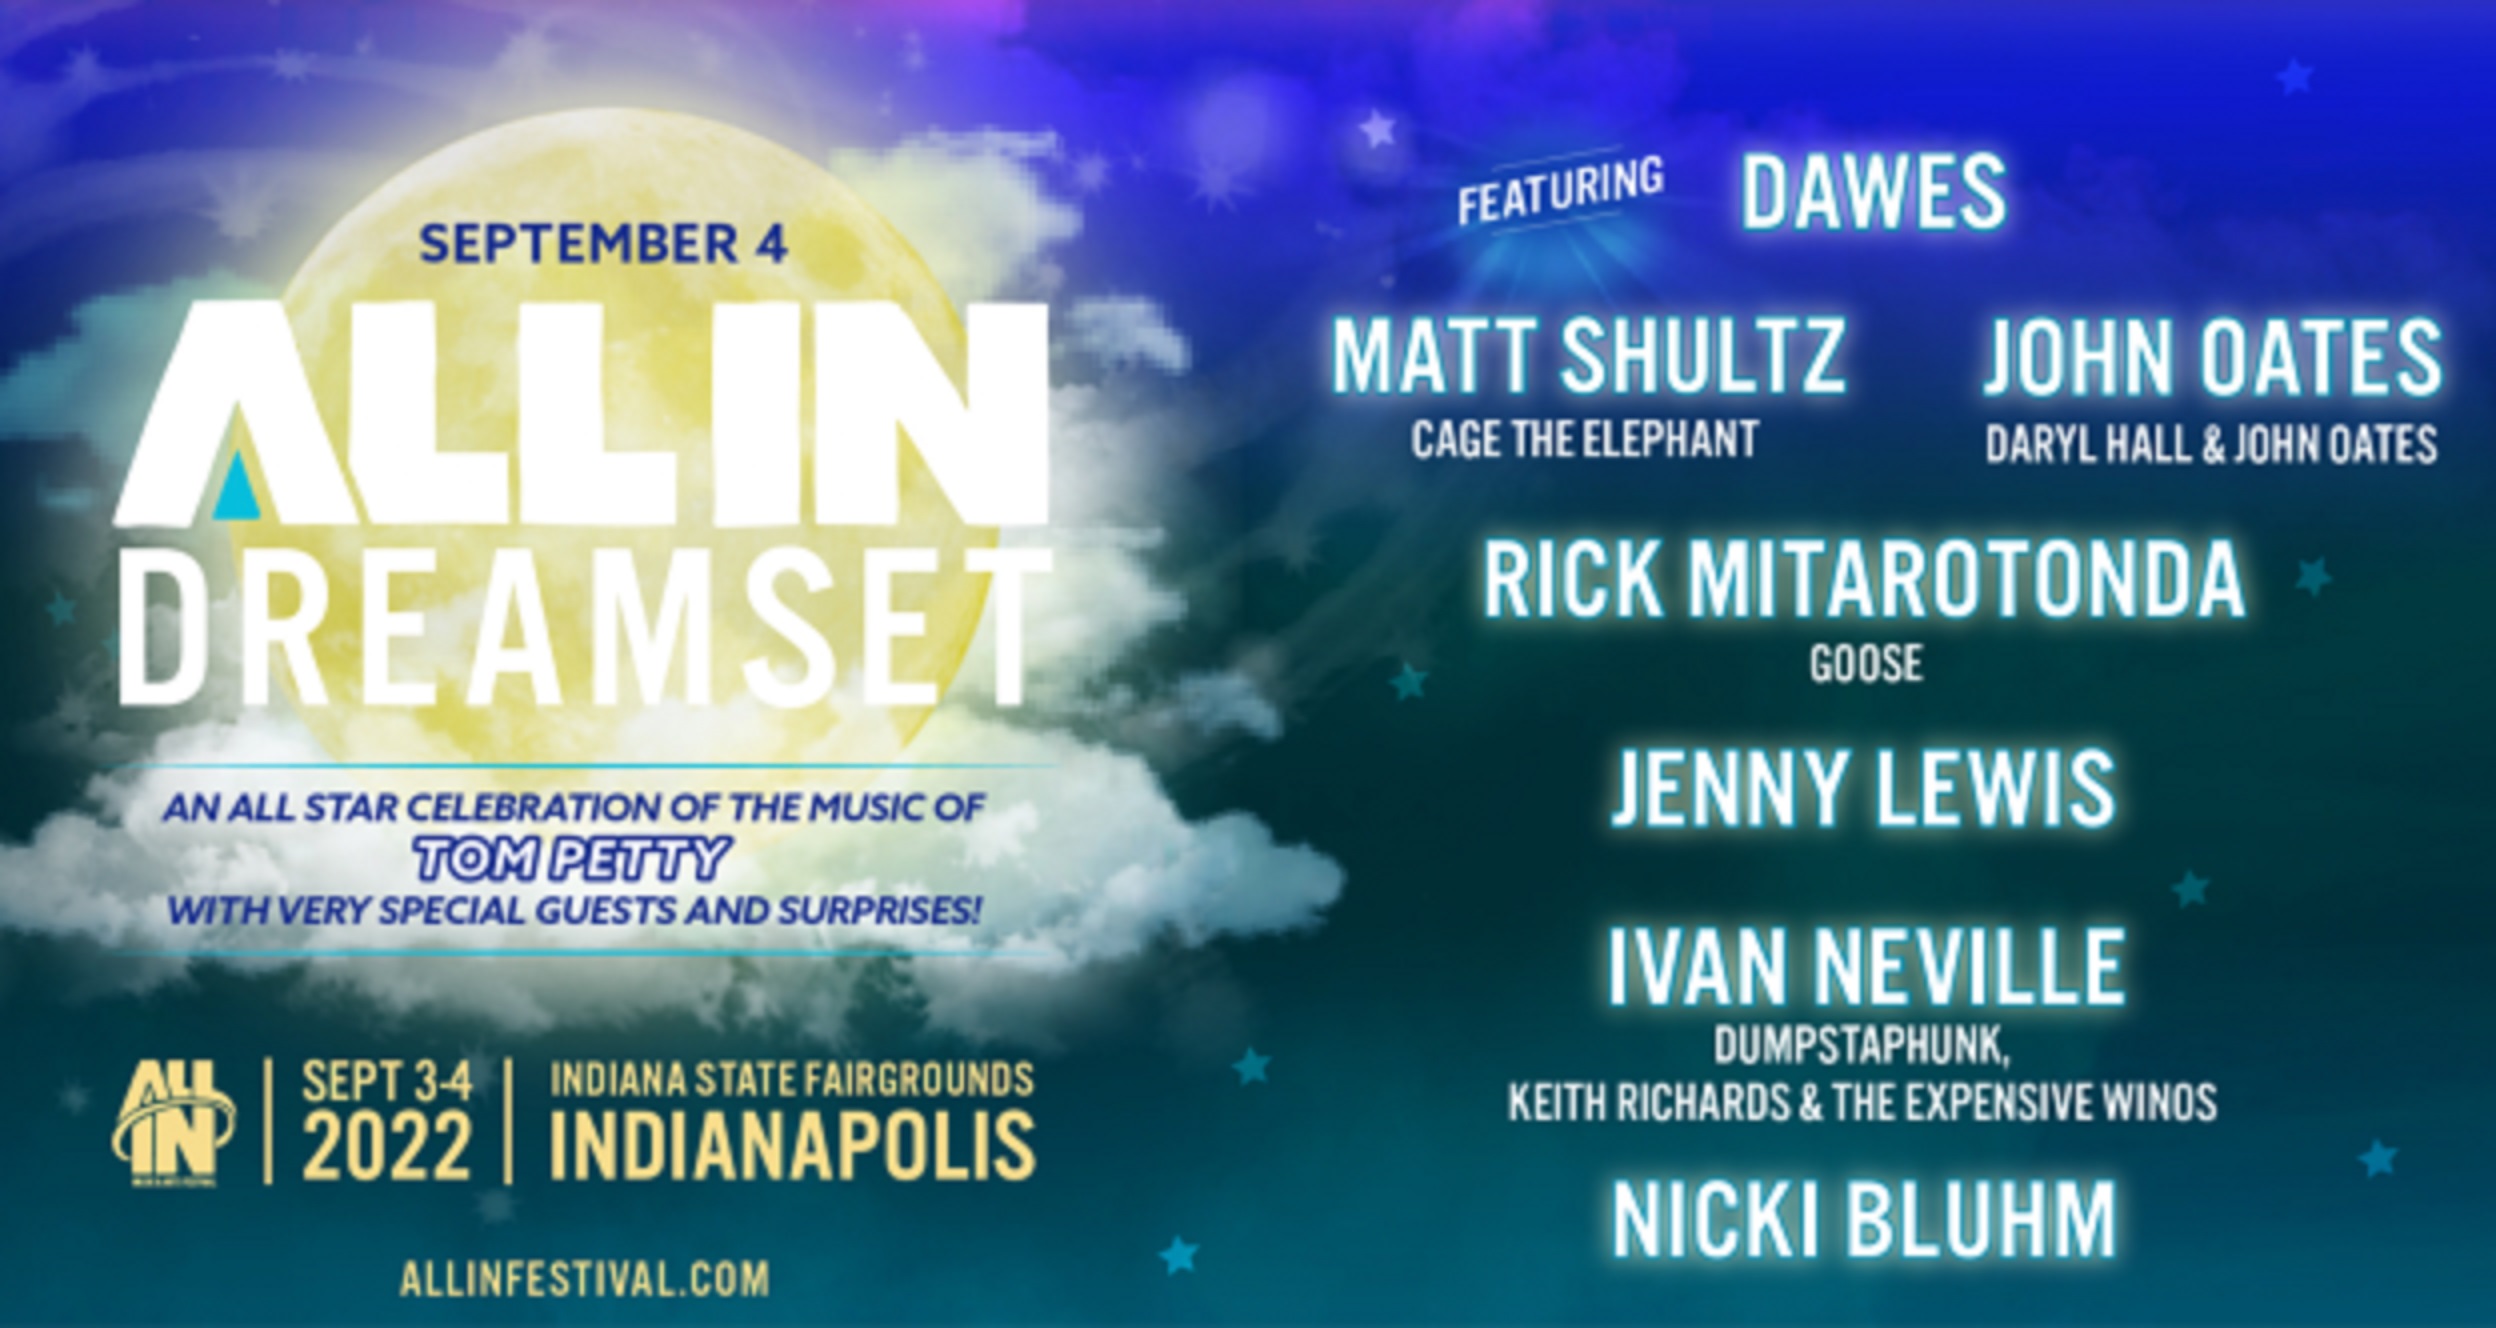 All IN Music Festival announces details for all-star lineup for Tom Petty Dreamset